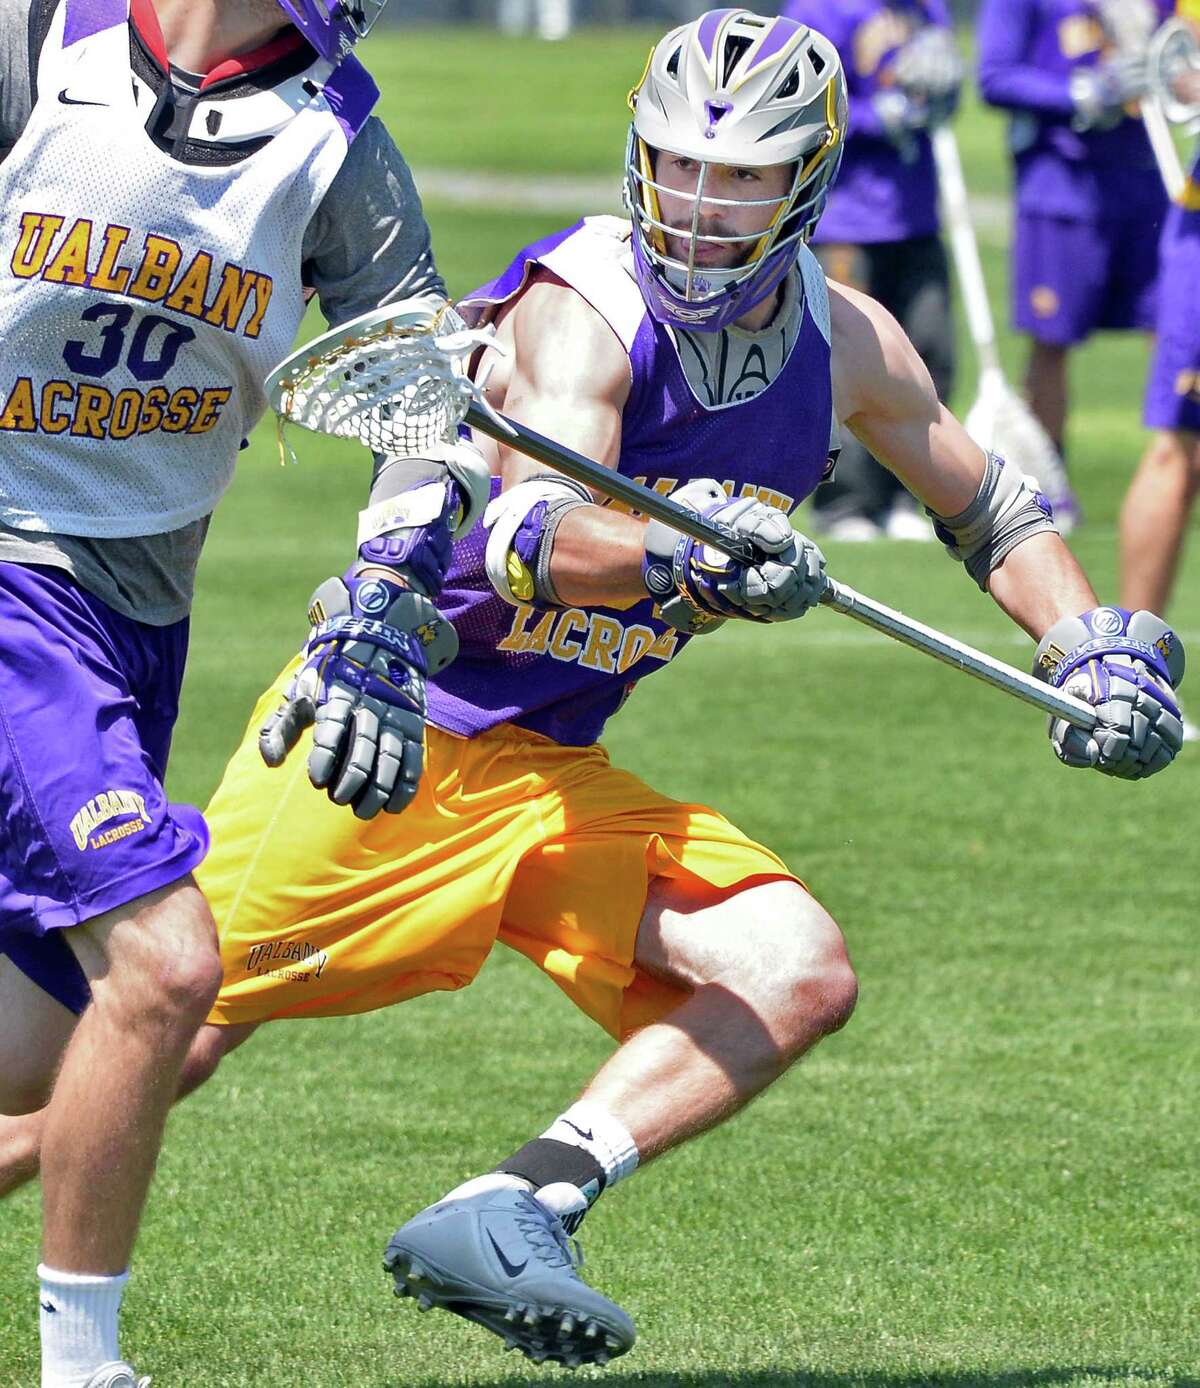 UAlbany lacrosse senior defenseman Mike Russell (No. 31) of Burnt Hills during practice Thursday May 14, 2015 in Albany, NY. (John Carl D'Annibale / Times Union)